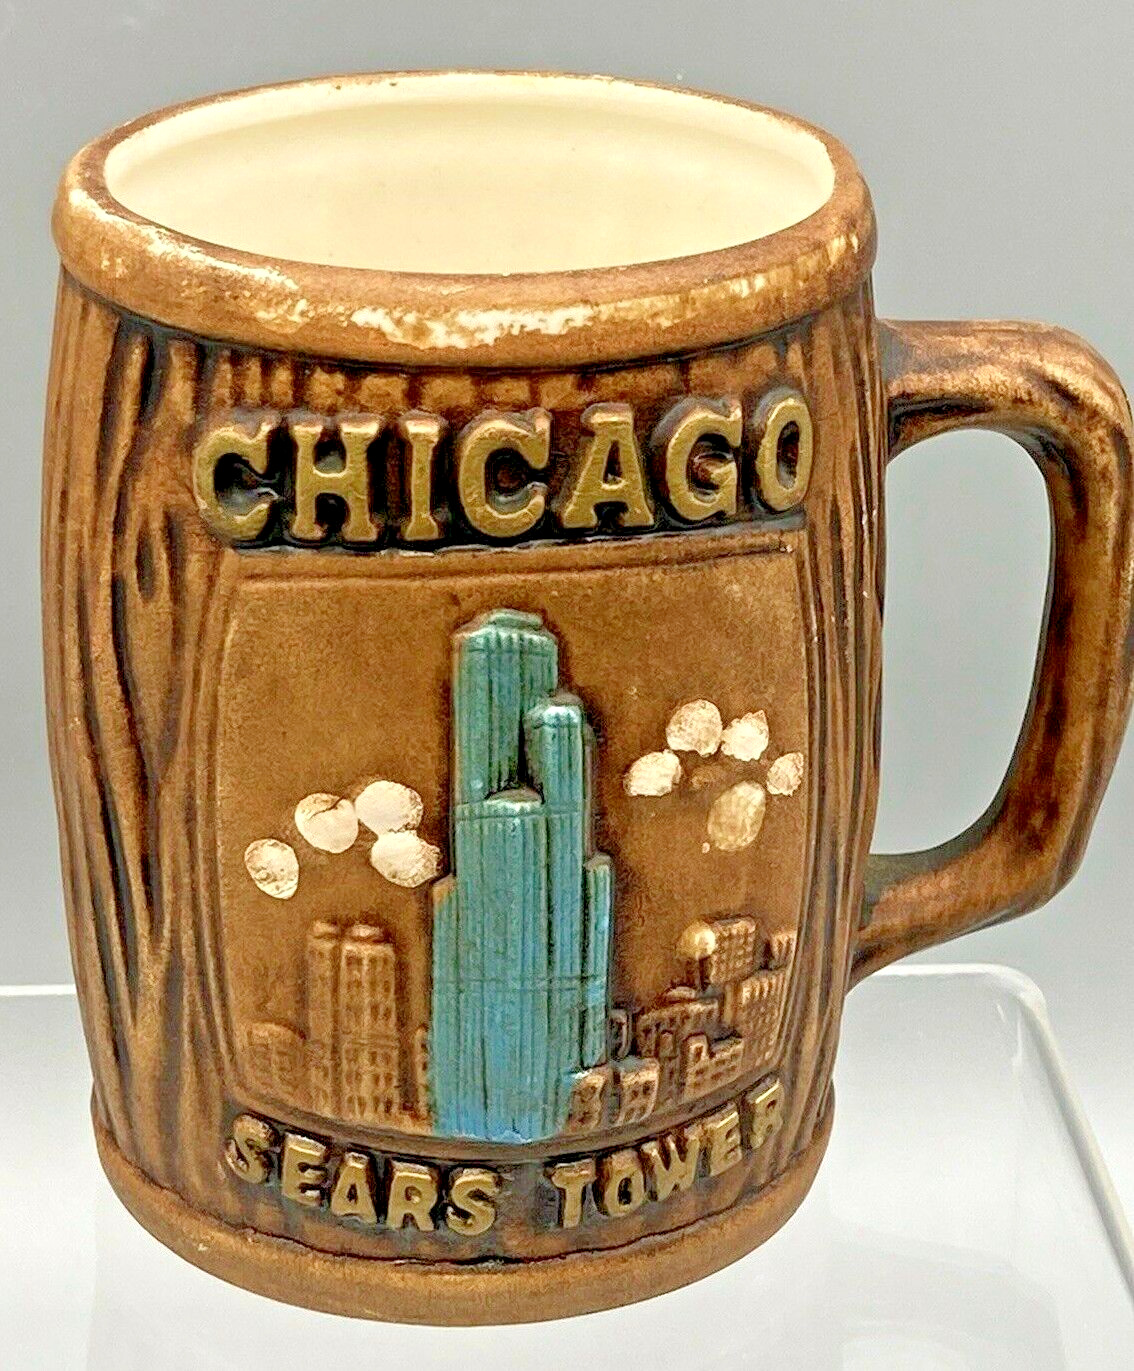 Chicago Souvenir Sears Tower kitschy Coffee Mug Made In Japan Ceramic Cup VTG